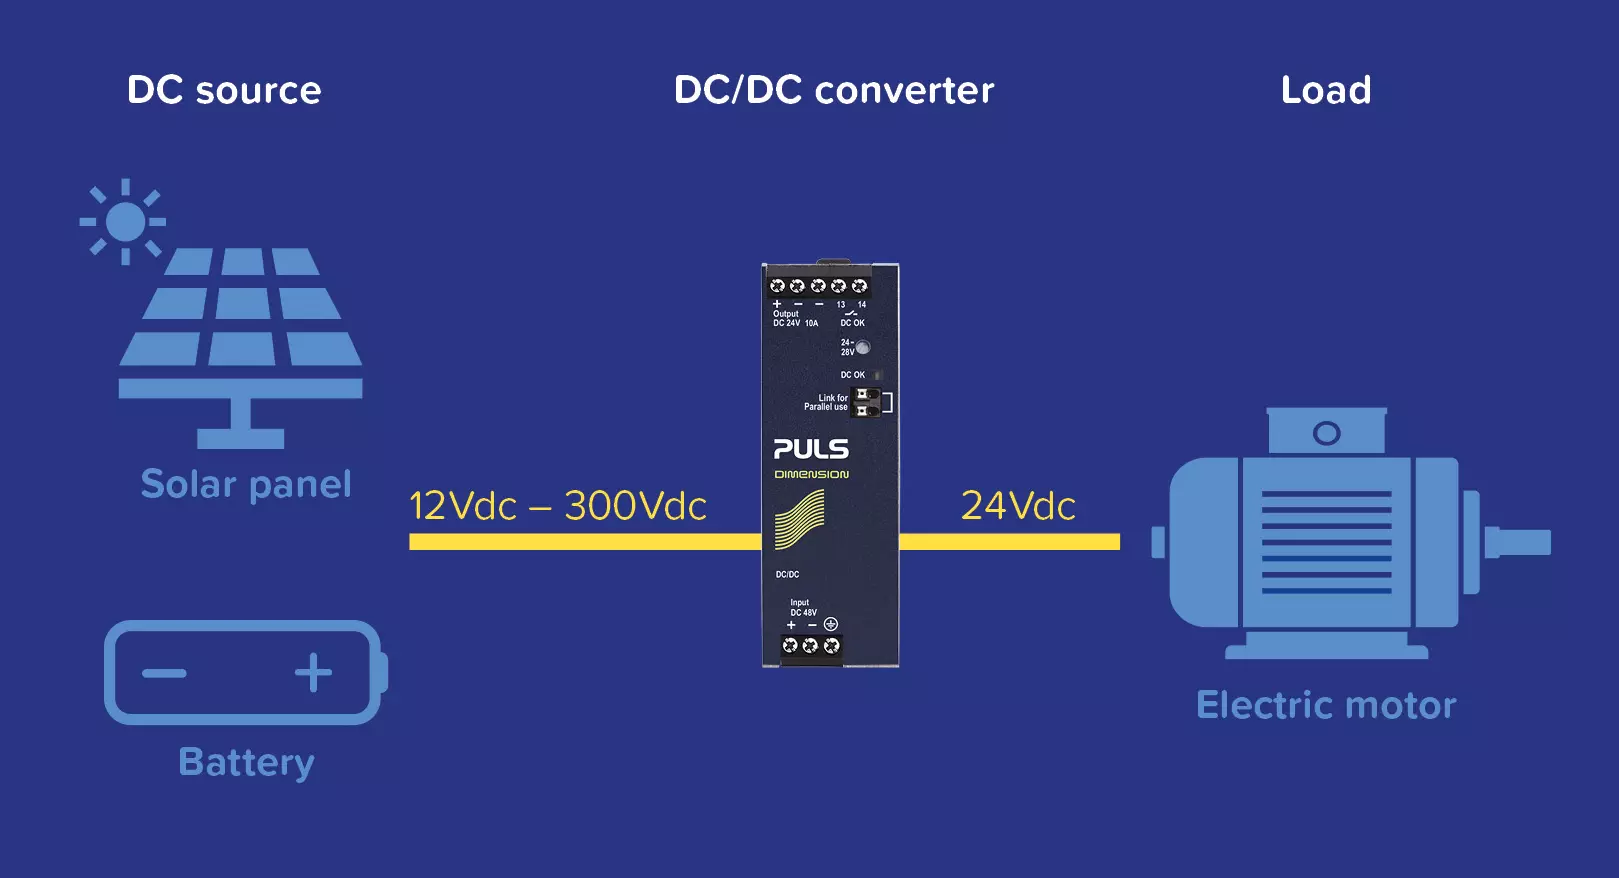 Functionality of an industrial DC/DC converter